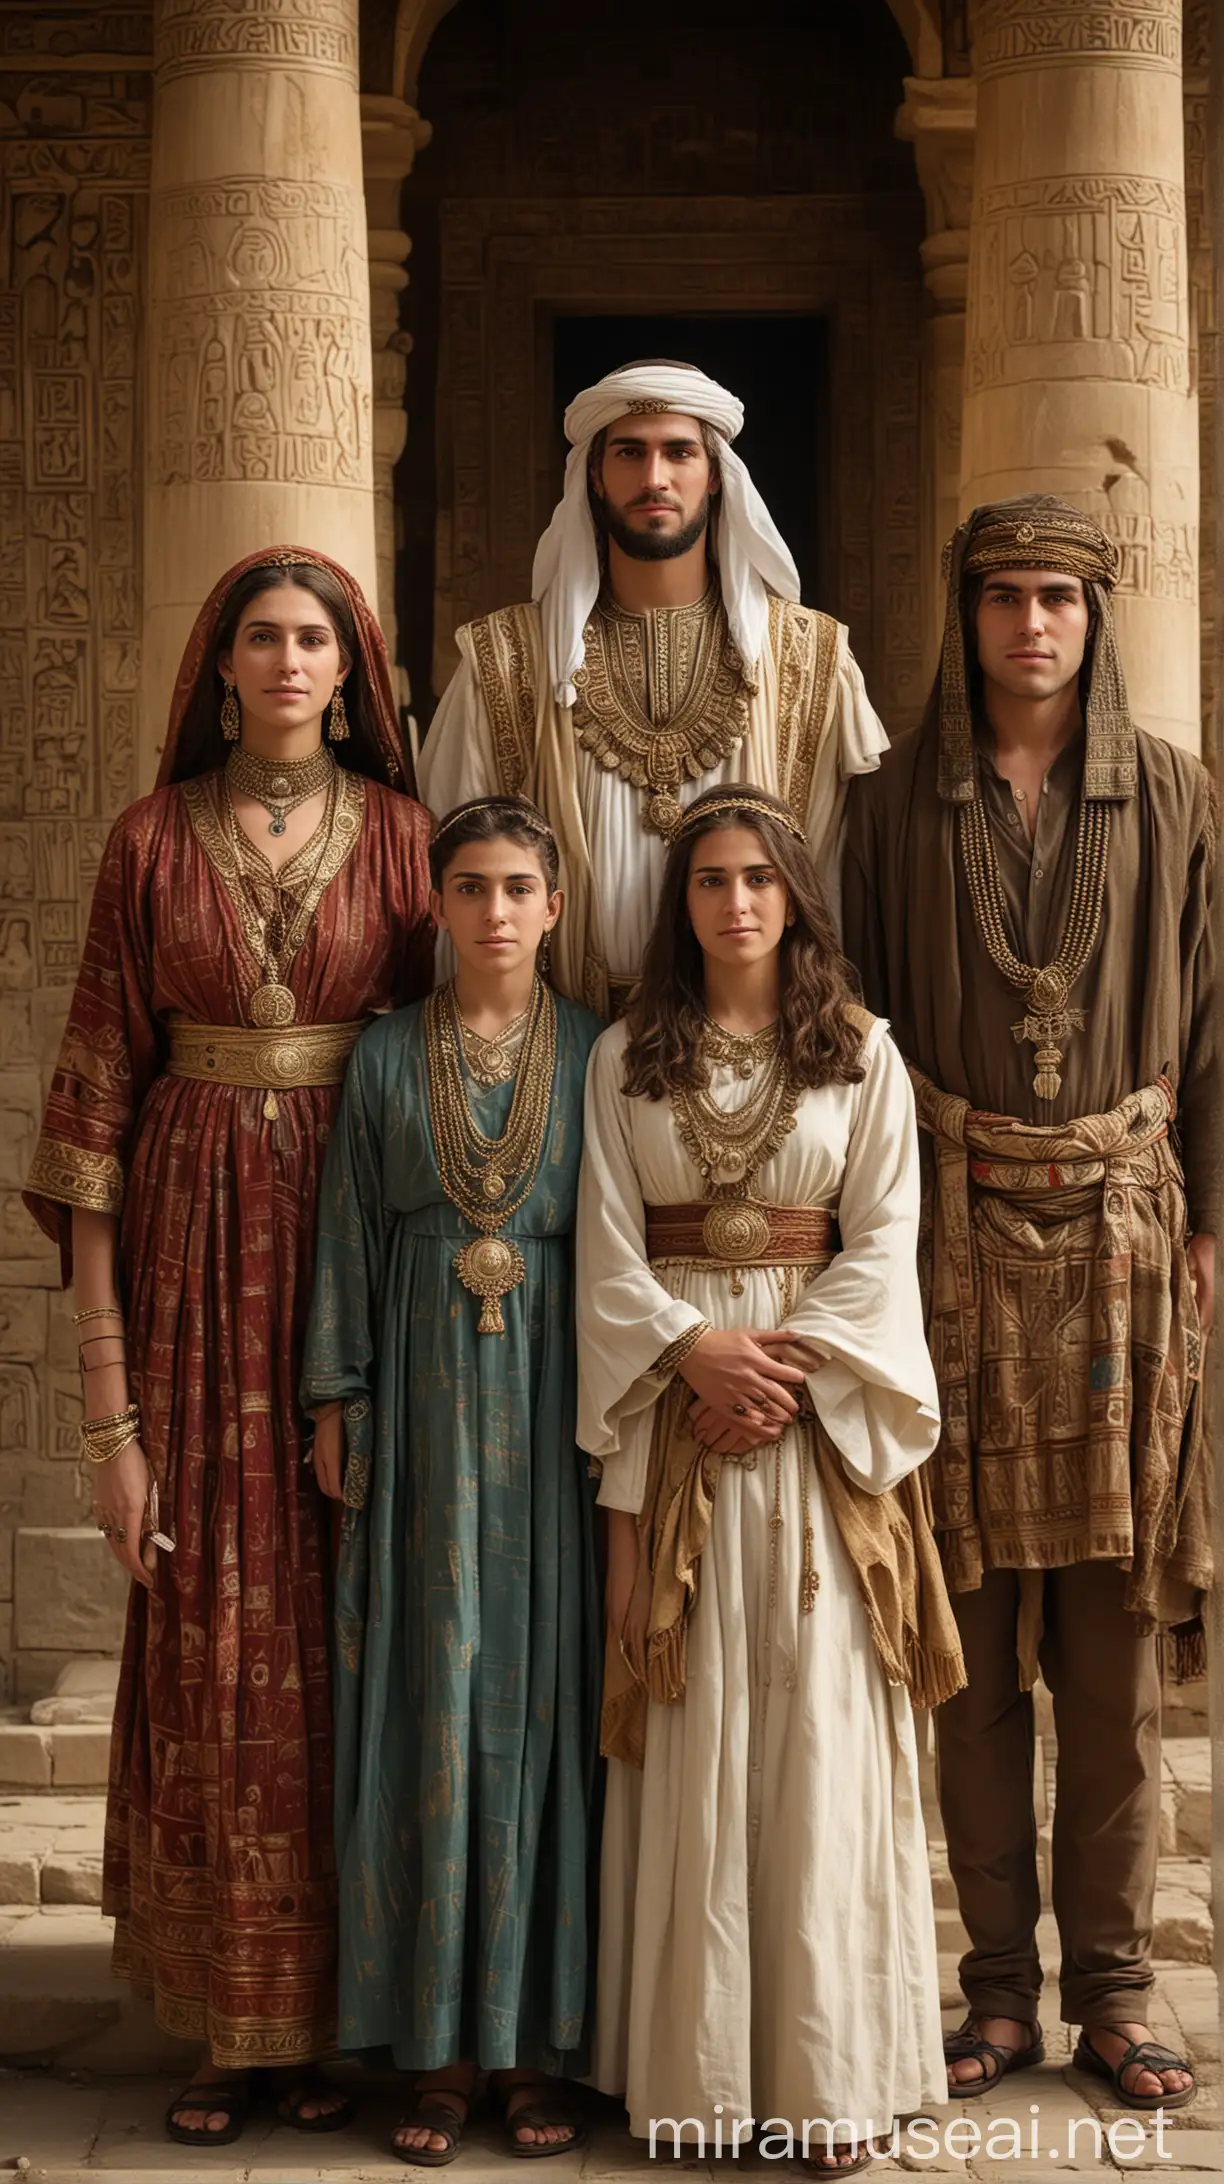 A regal family portrait with Onan, a young man with a subtle expression, standing alongside his parents Judah and the Canaanite woman, in a 17th century BC setting, surrounded by ancient architecture and attire."In ancient world 